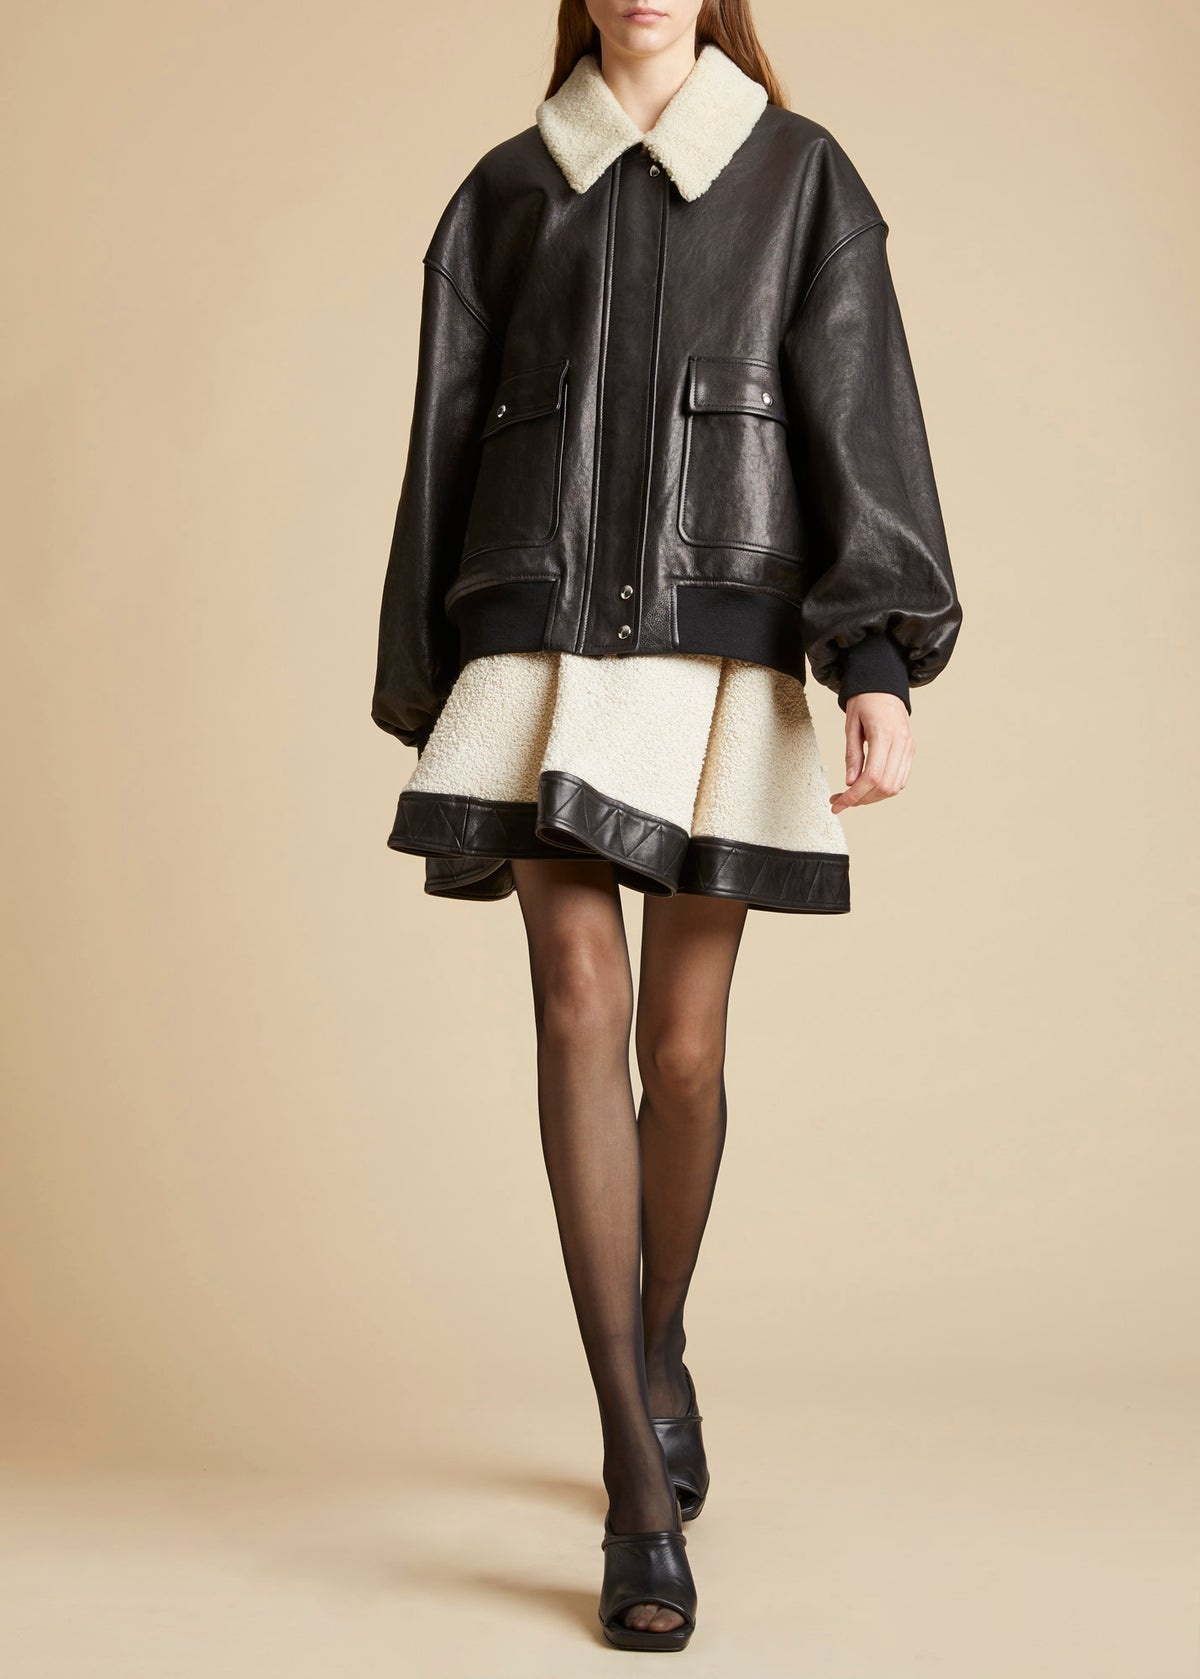 The Shellar Jacket in Black Leather - 2